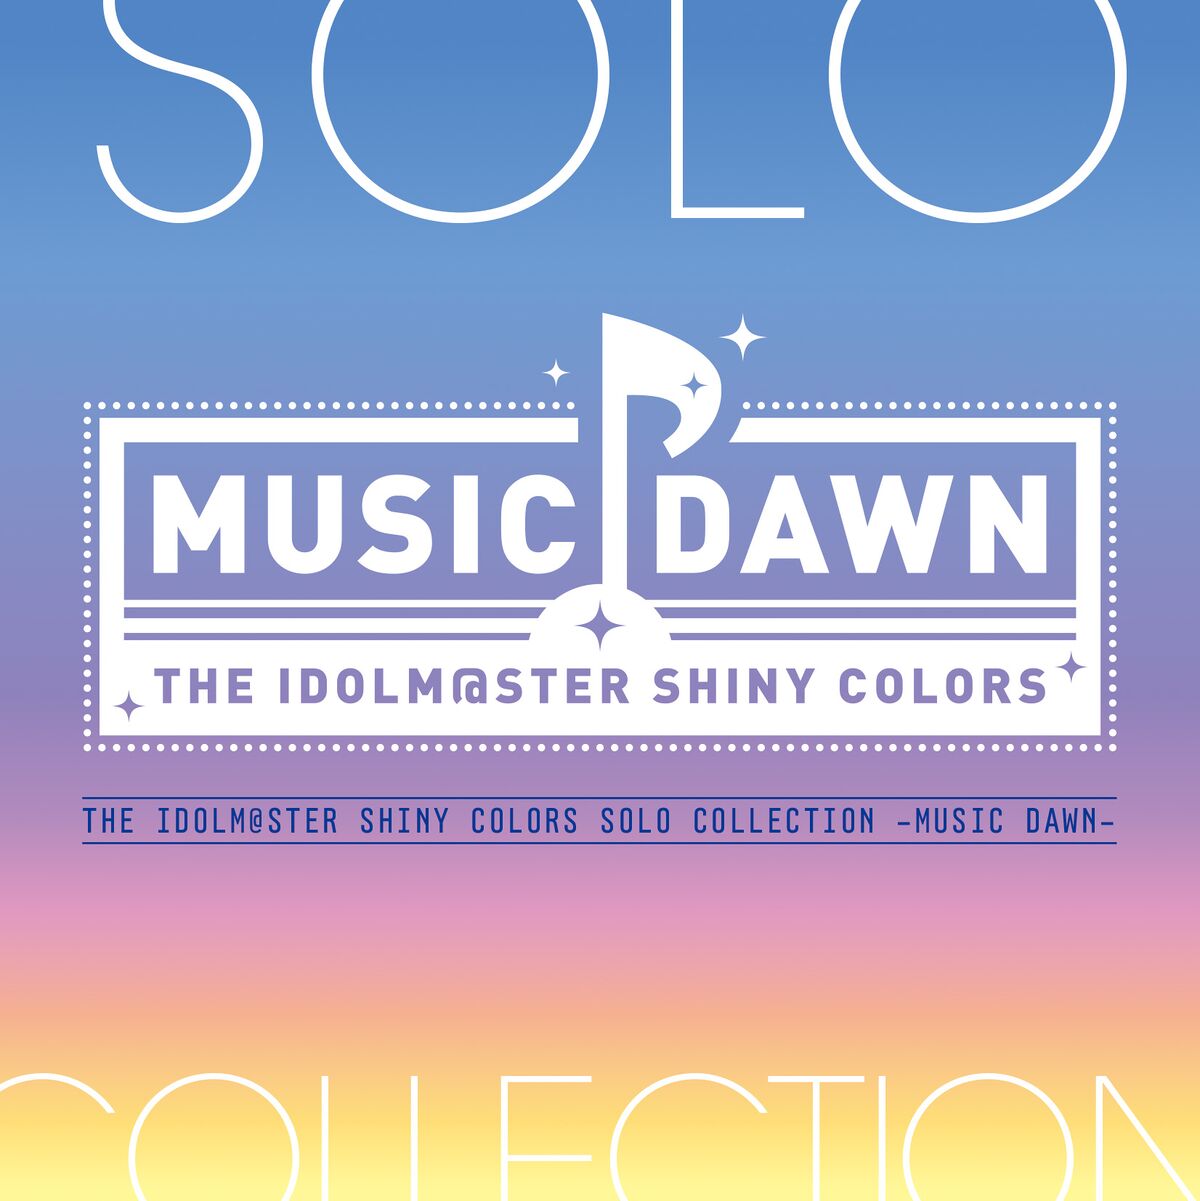 THE IDOLM@STER SHINY COLORS SOLO COLLECTION -MUSIC DAWN